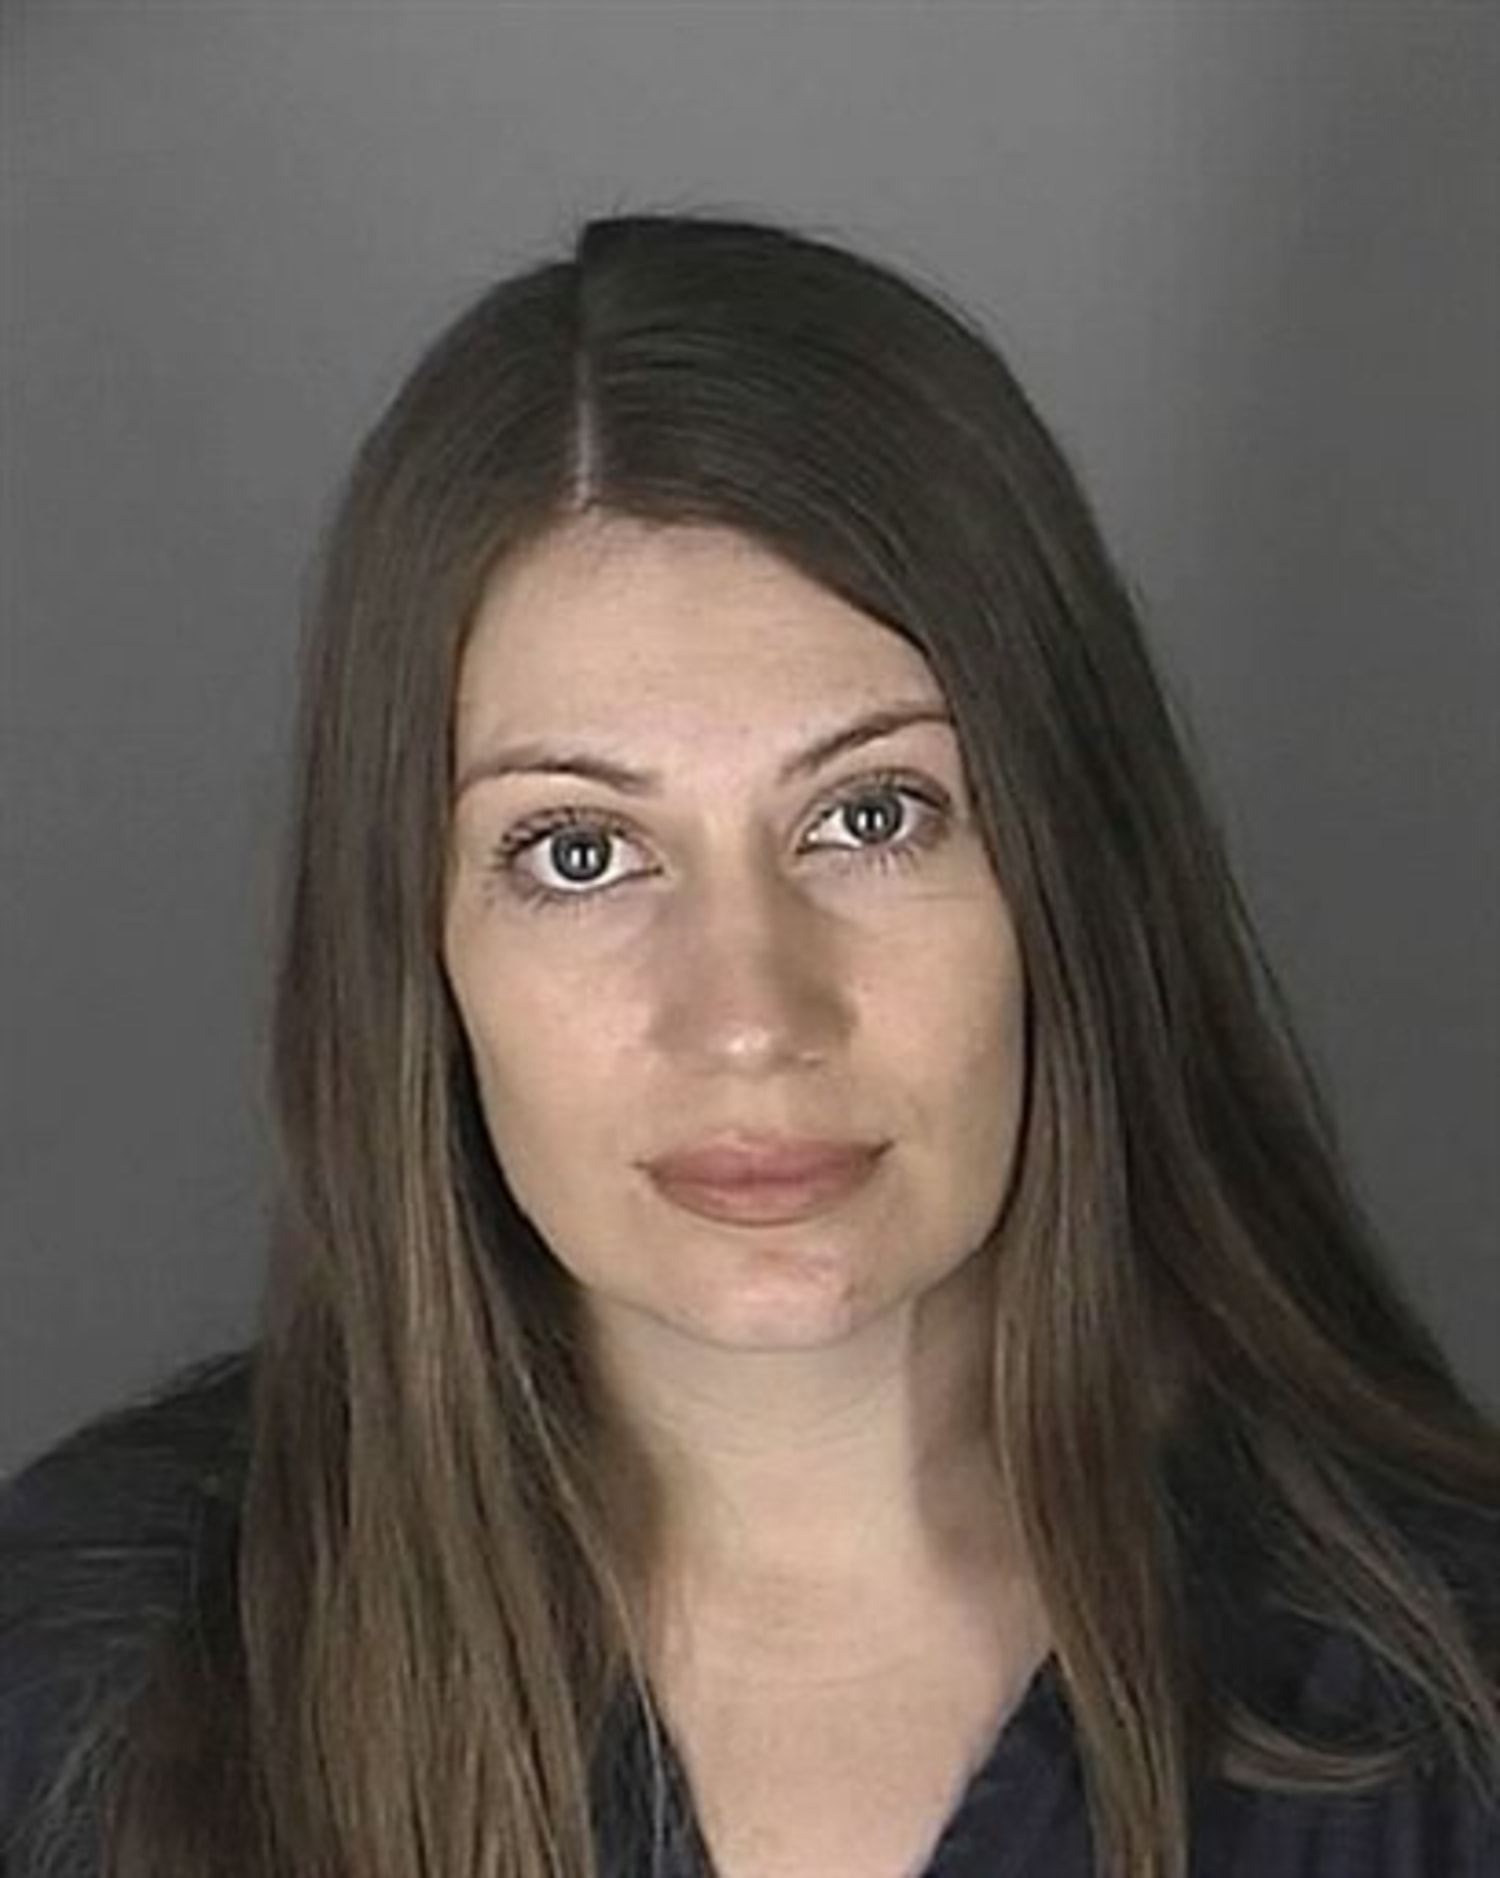 Mom jailed over sex with 14-year-old photo